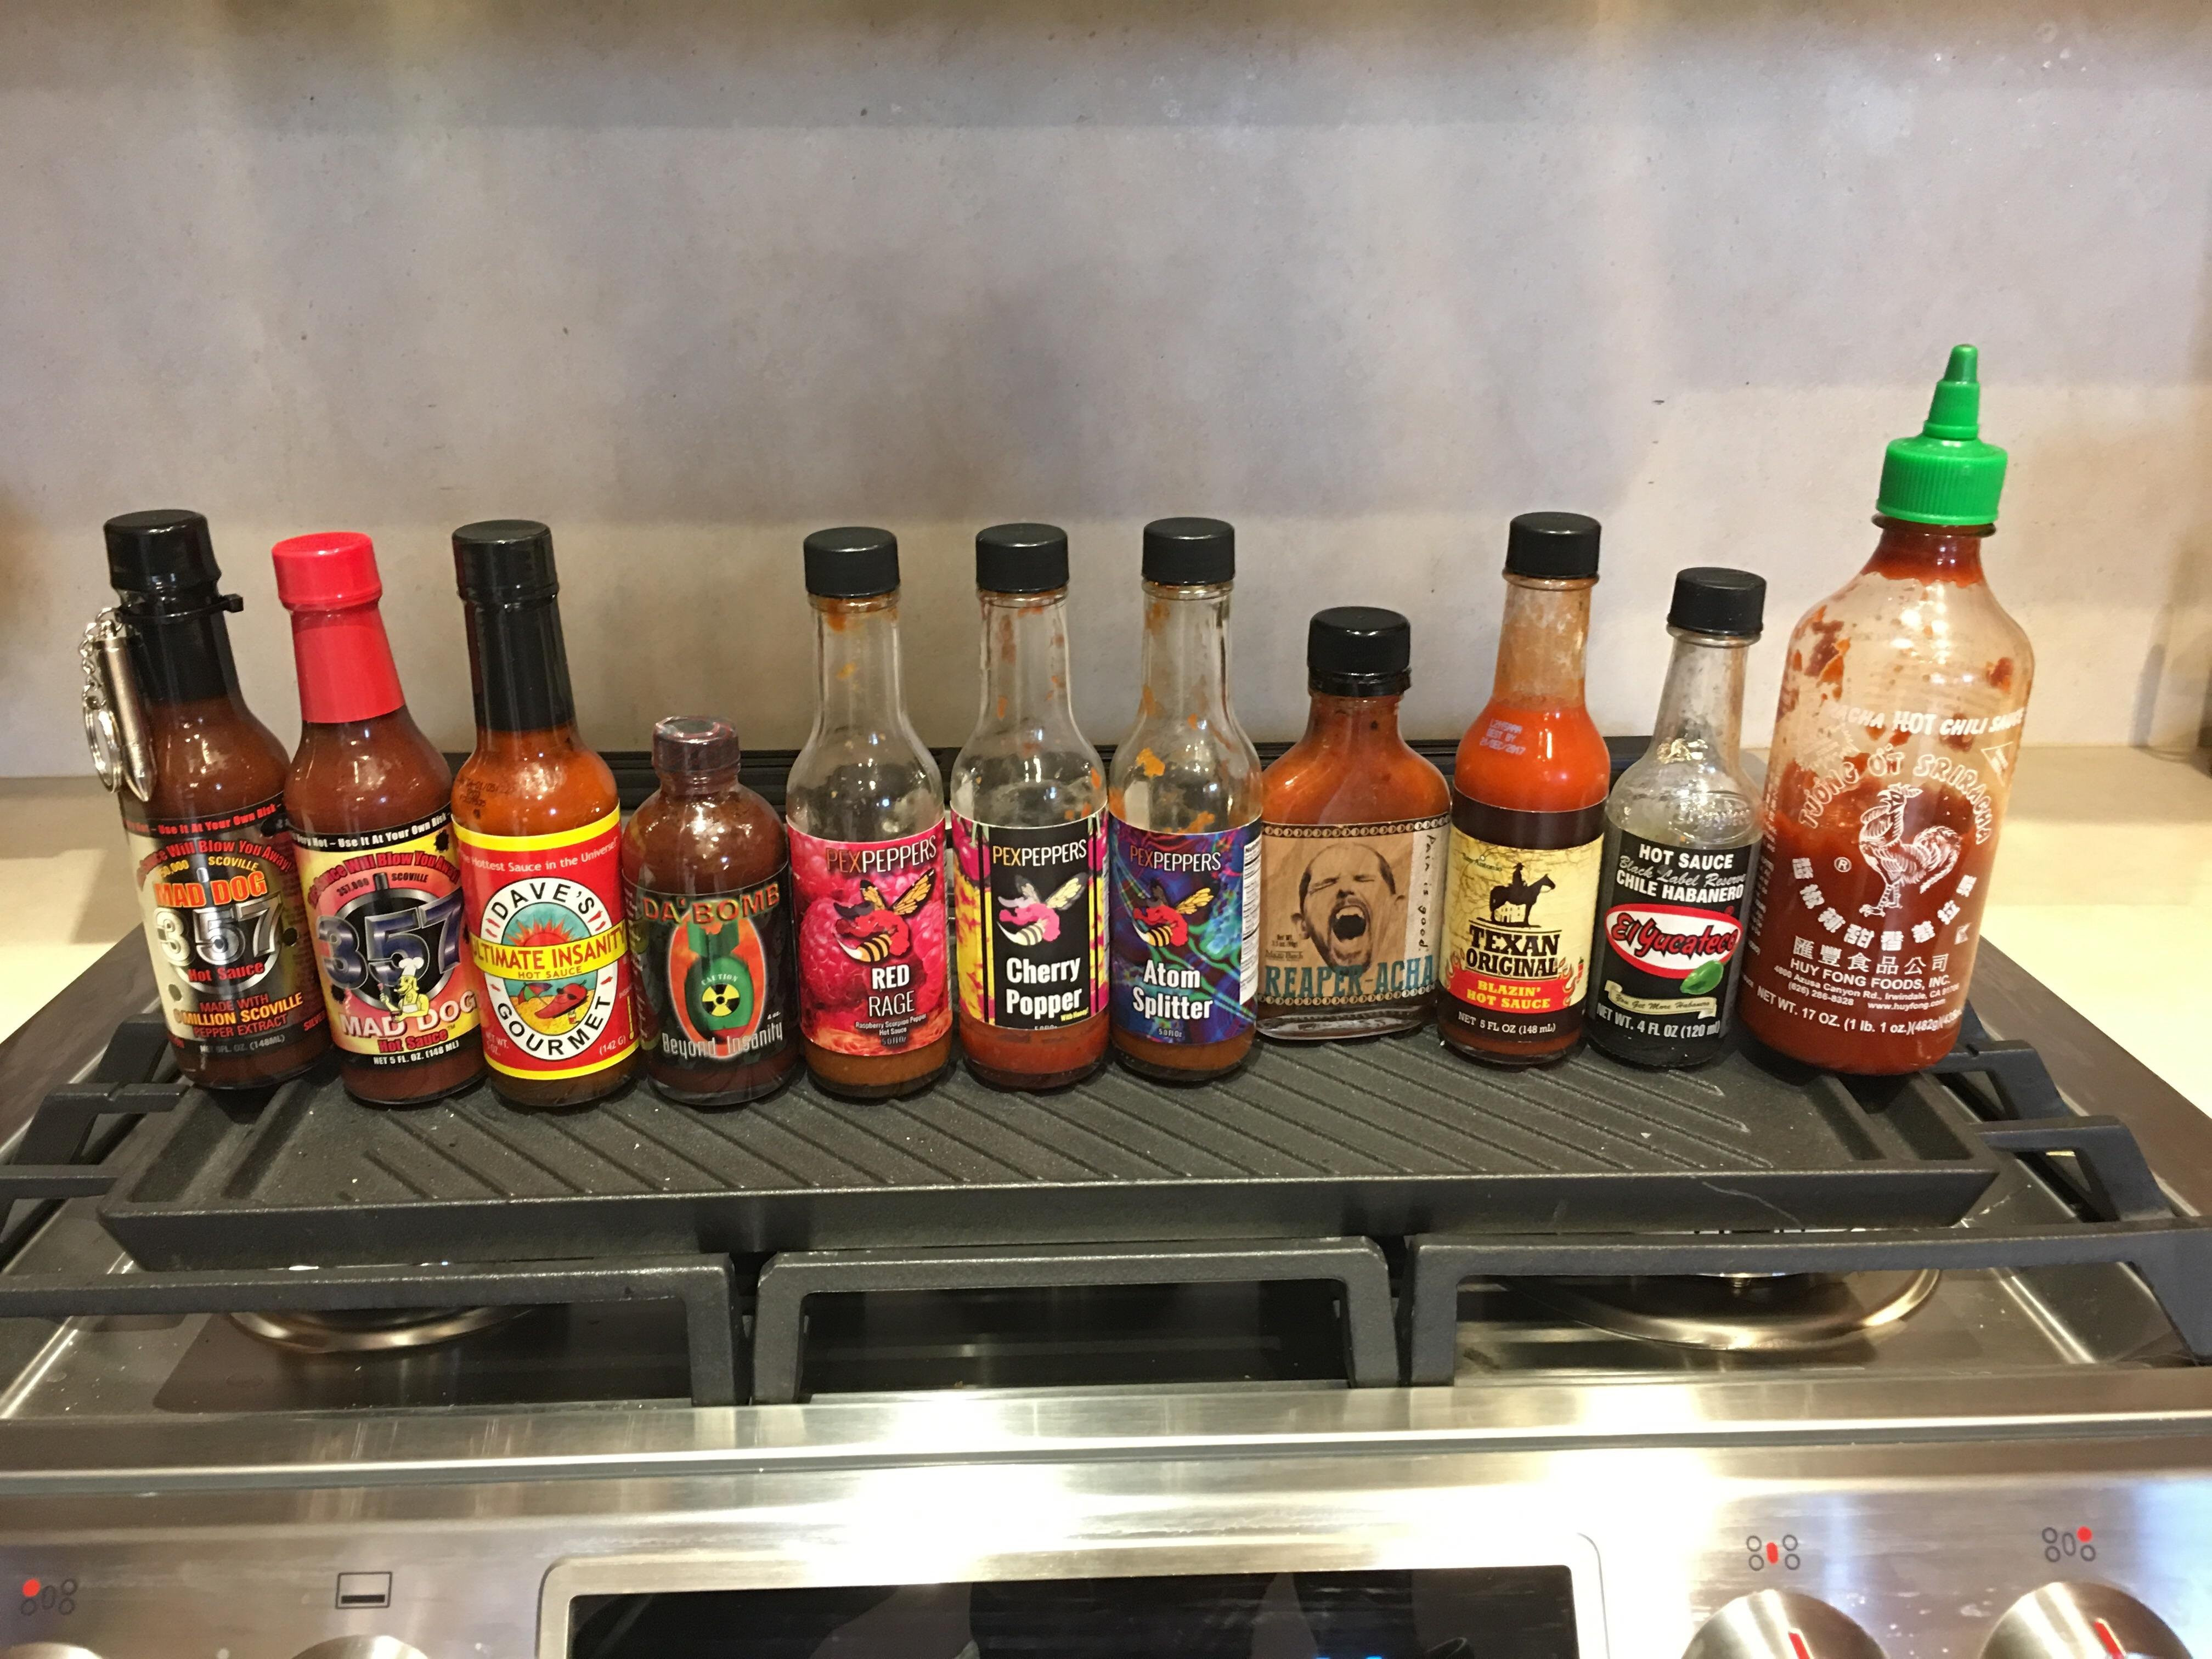 Hot Ones Hot Sauces
 Improvising the hot ones challenge with my buddy u